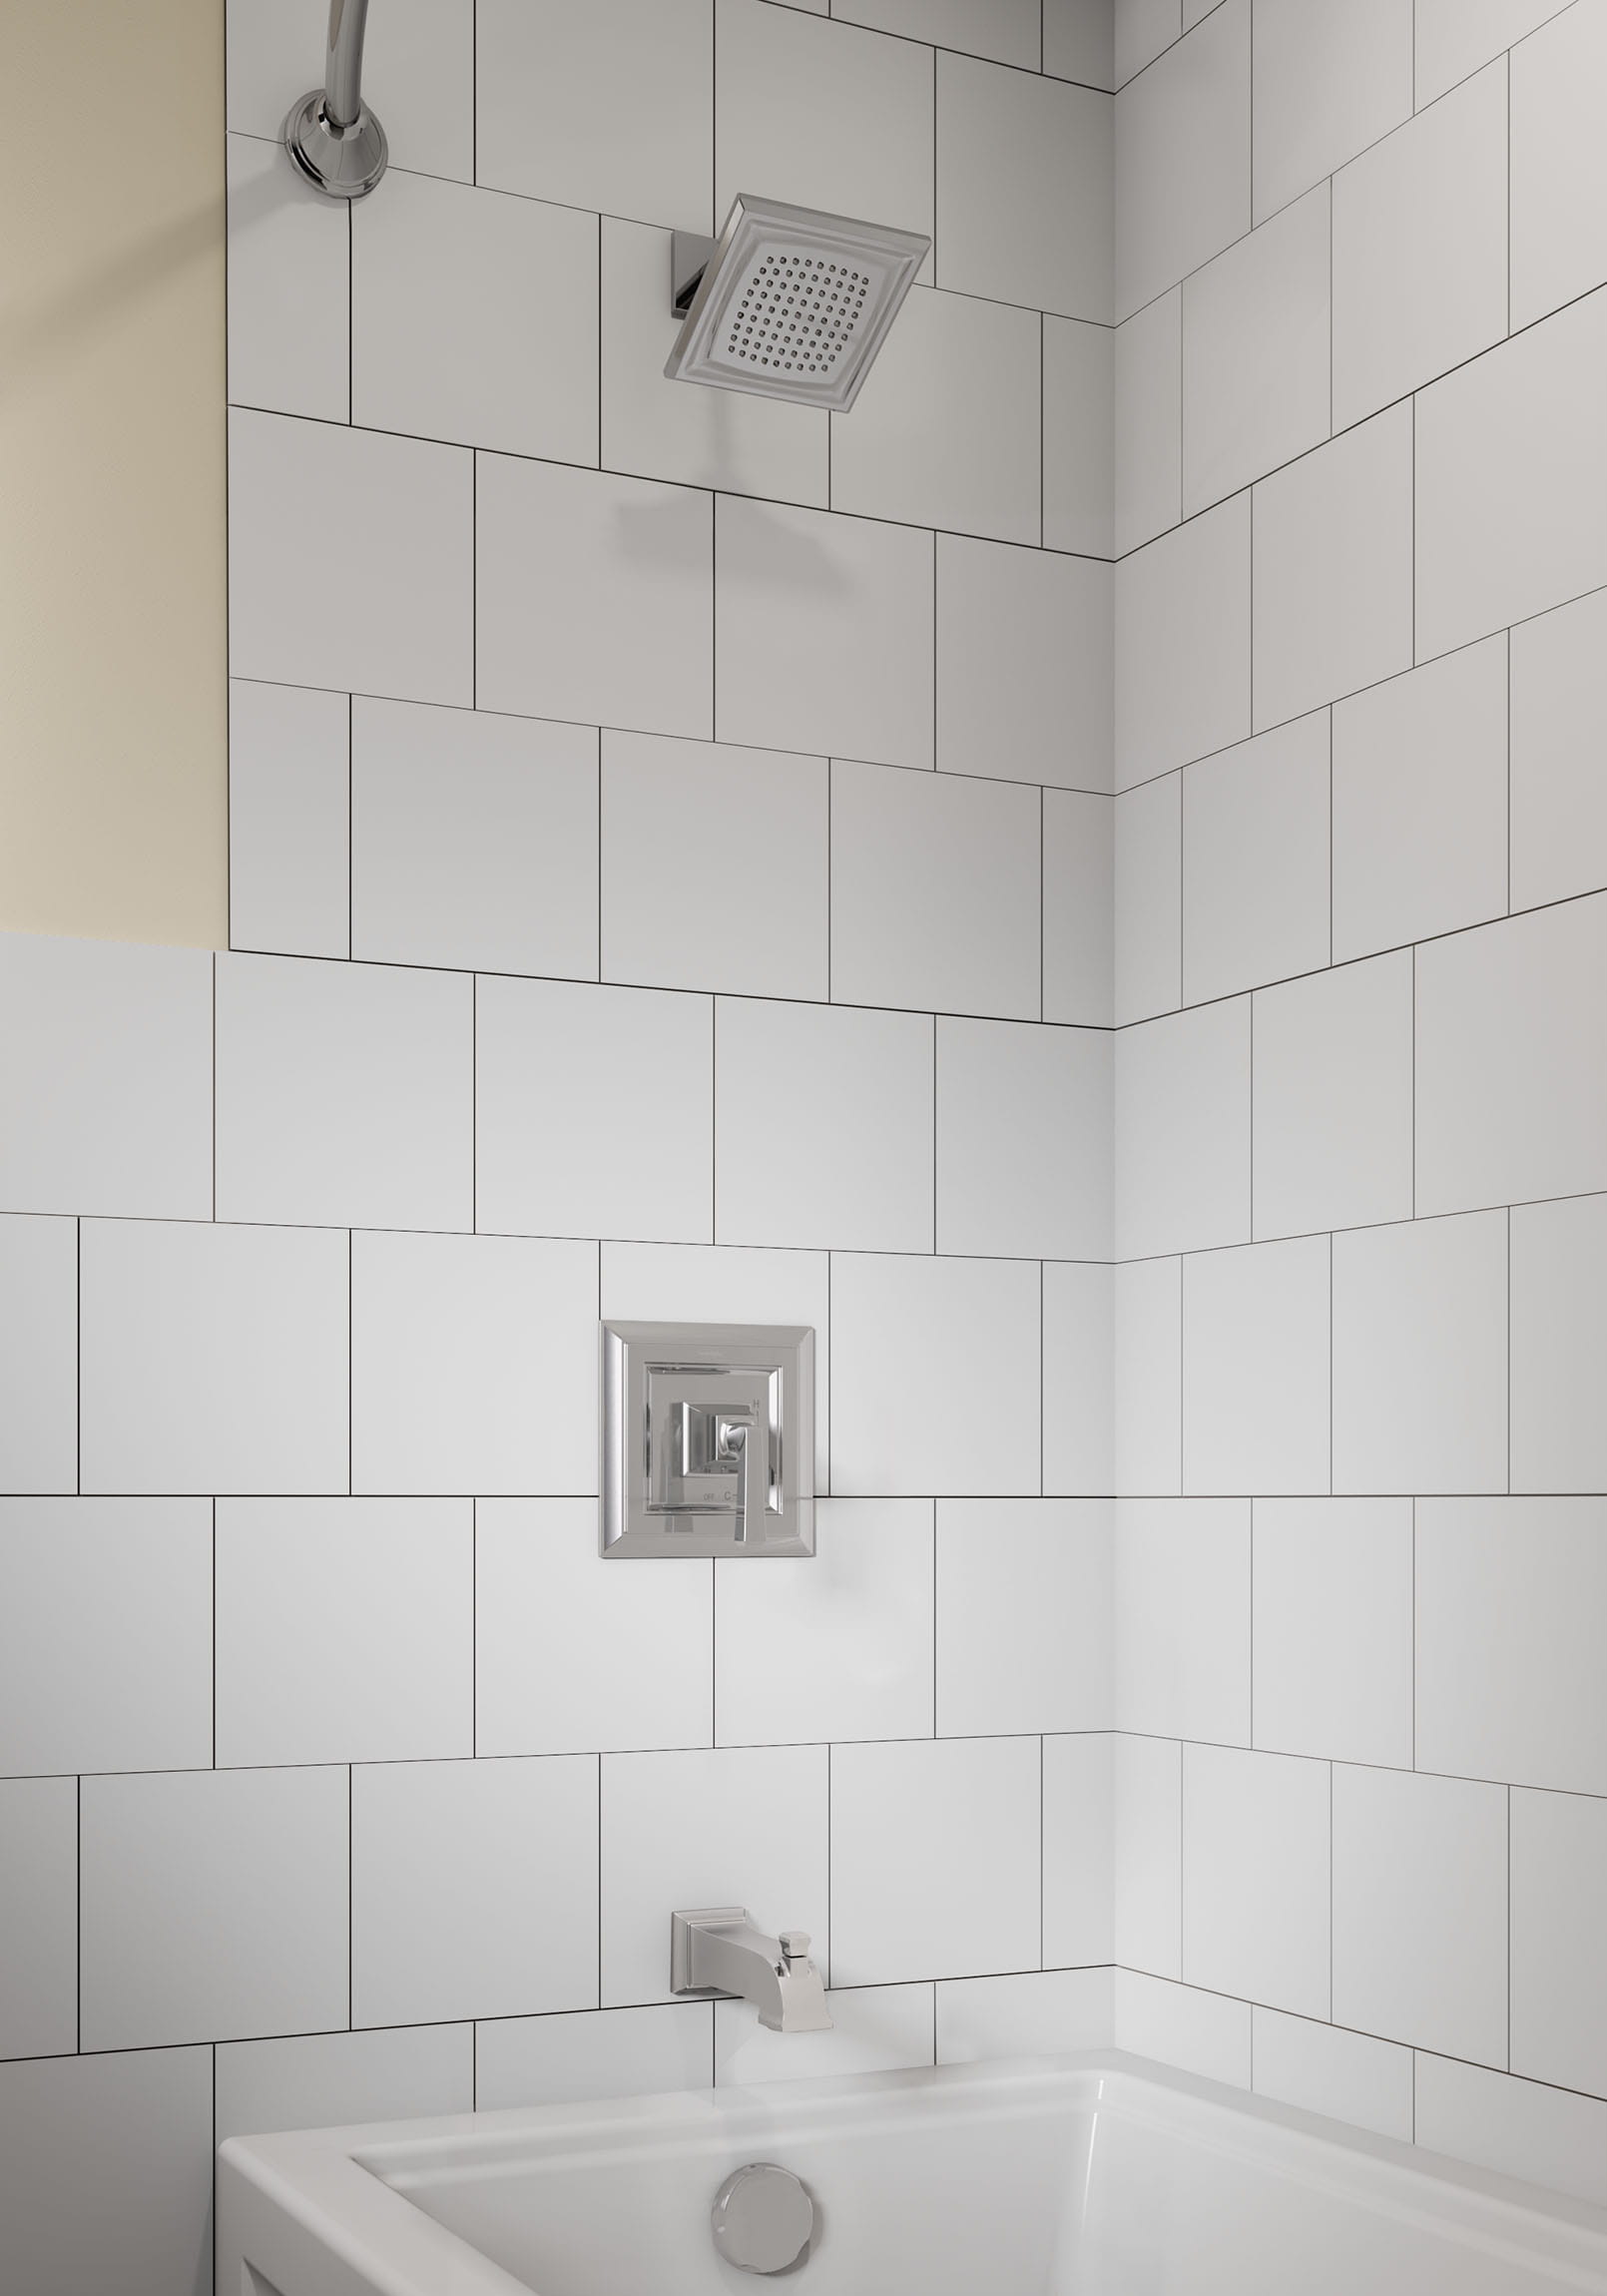 Town Square® S 1.75 gpm/6.8 L/min Tub and Shower Trim Kit With Water-Saving Showerhead, Double Ceramic Pressure Balance Cartridge With Lever Handle